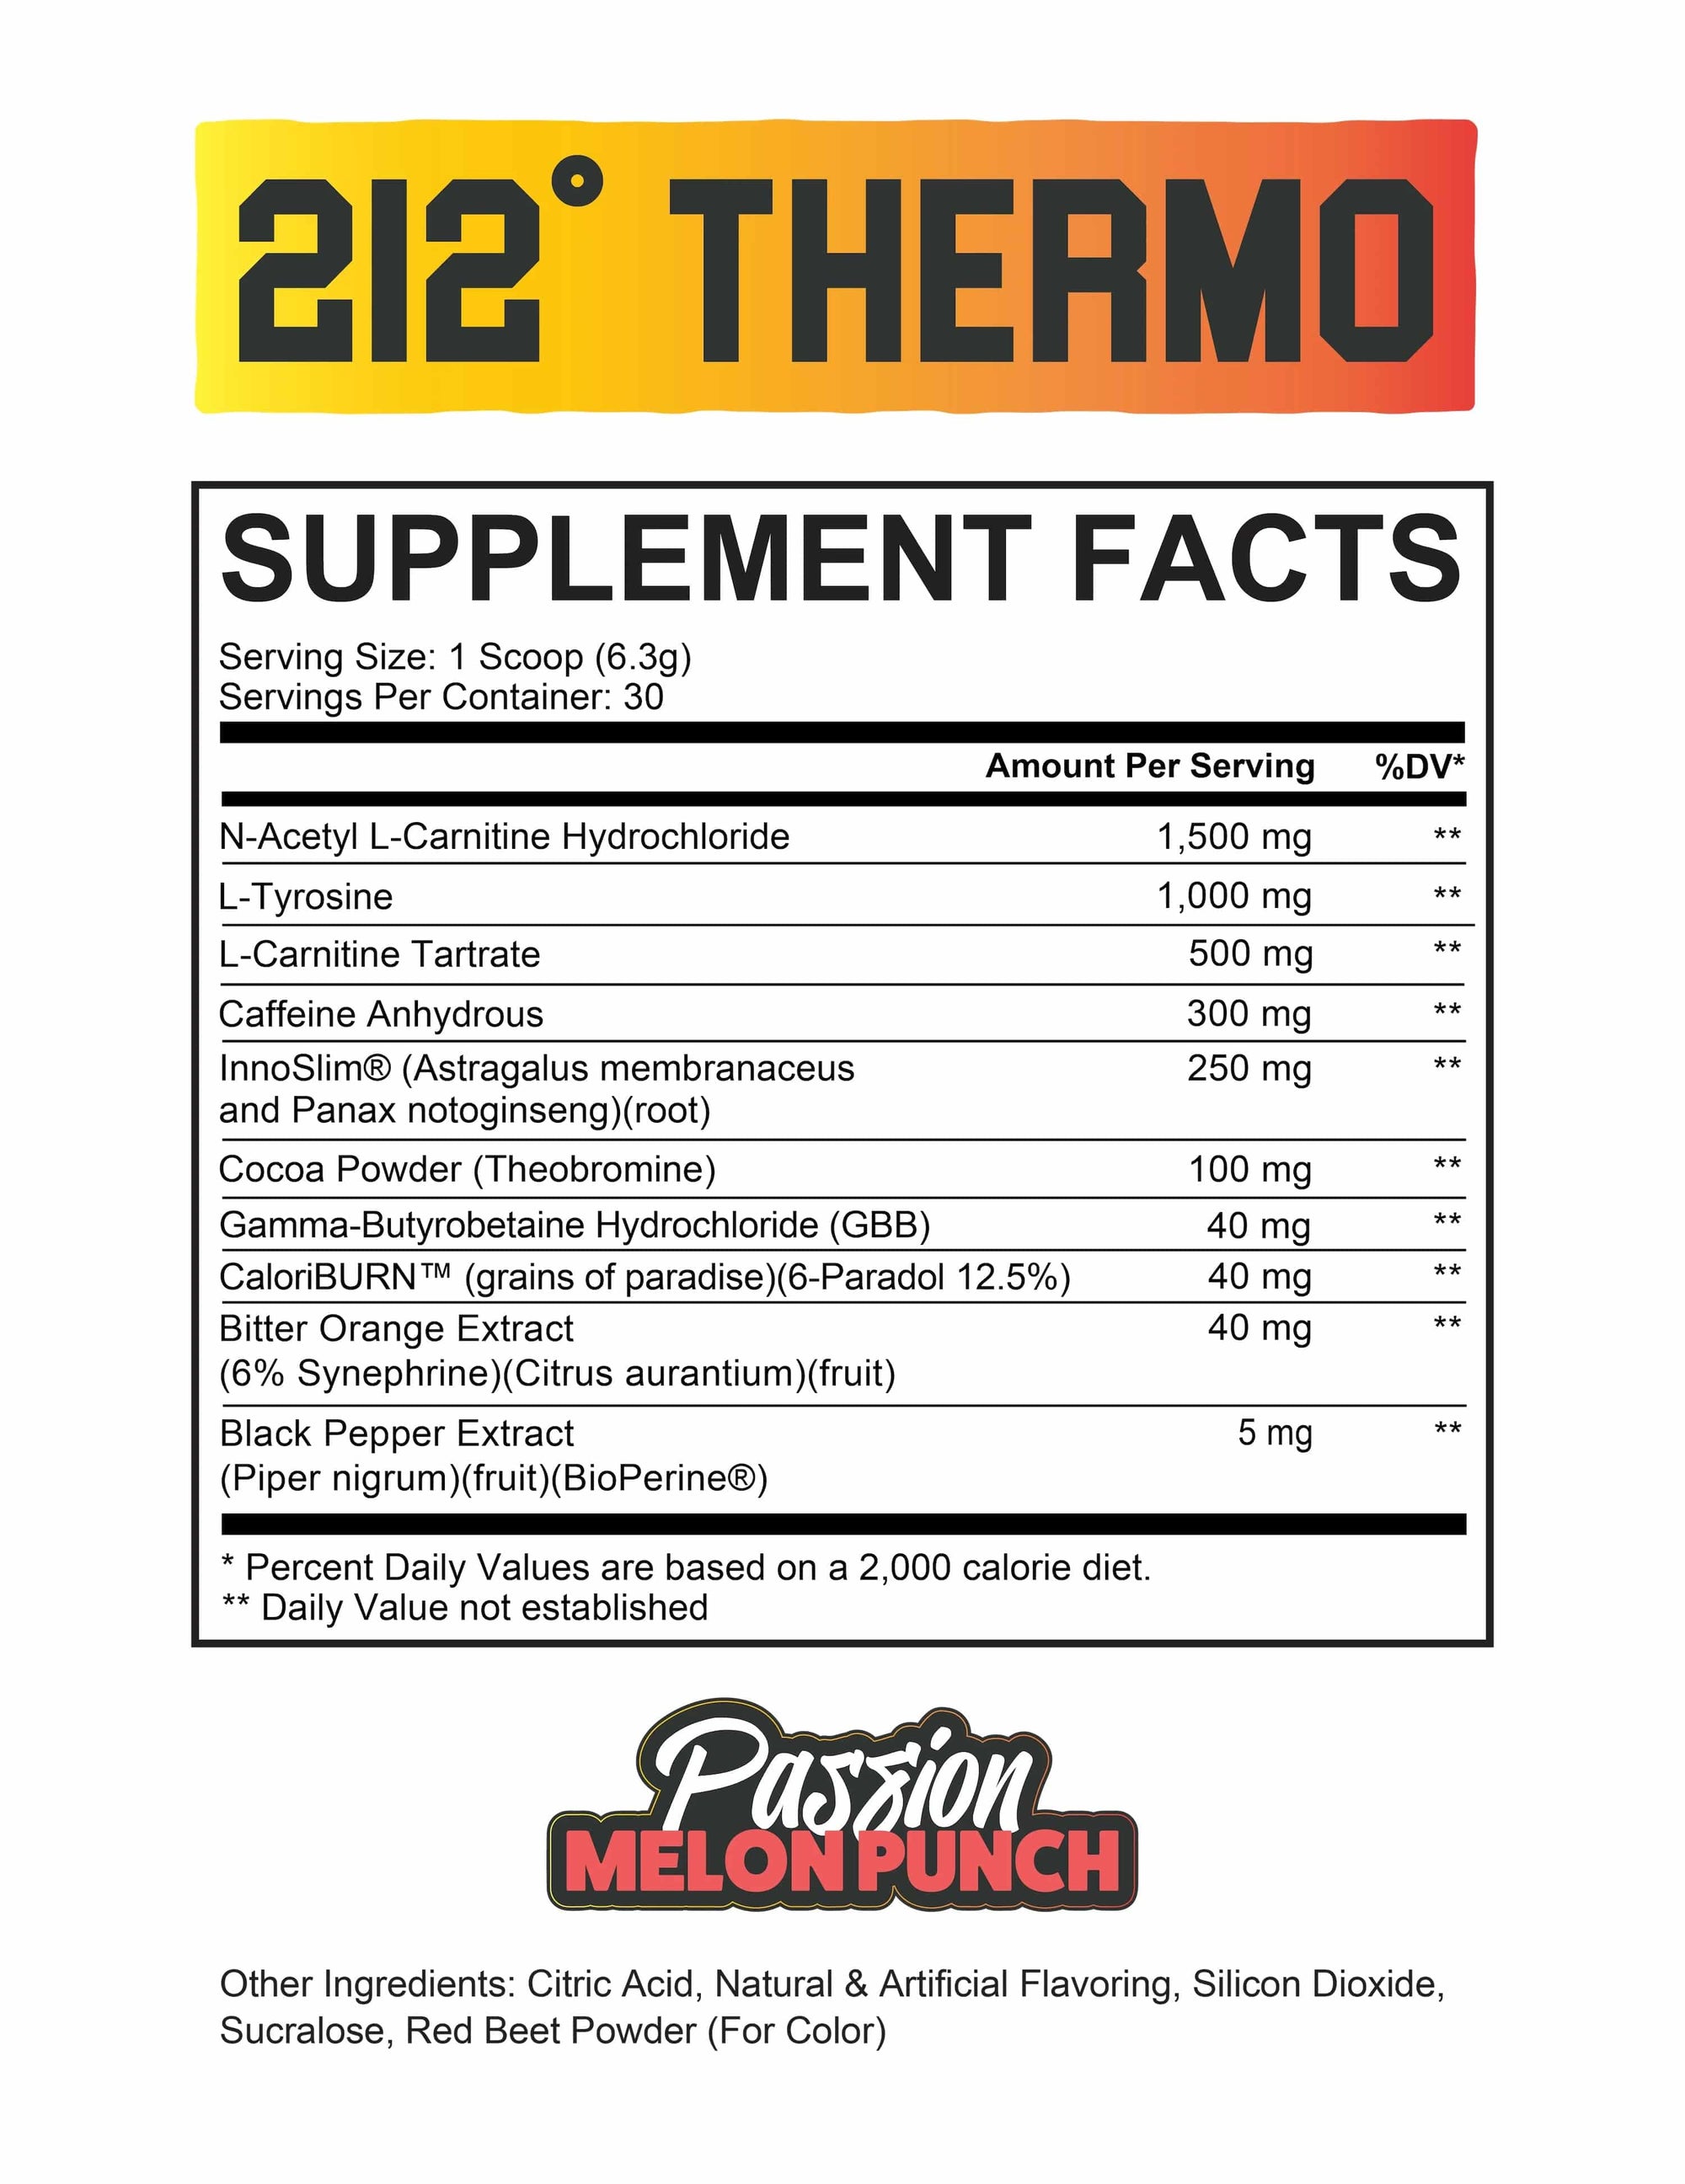 212 Thermo - Bemoxie Supplements